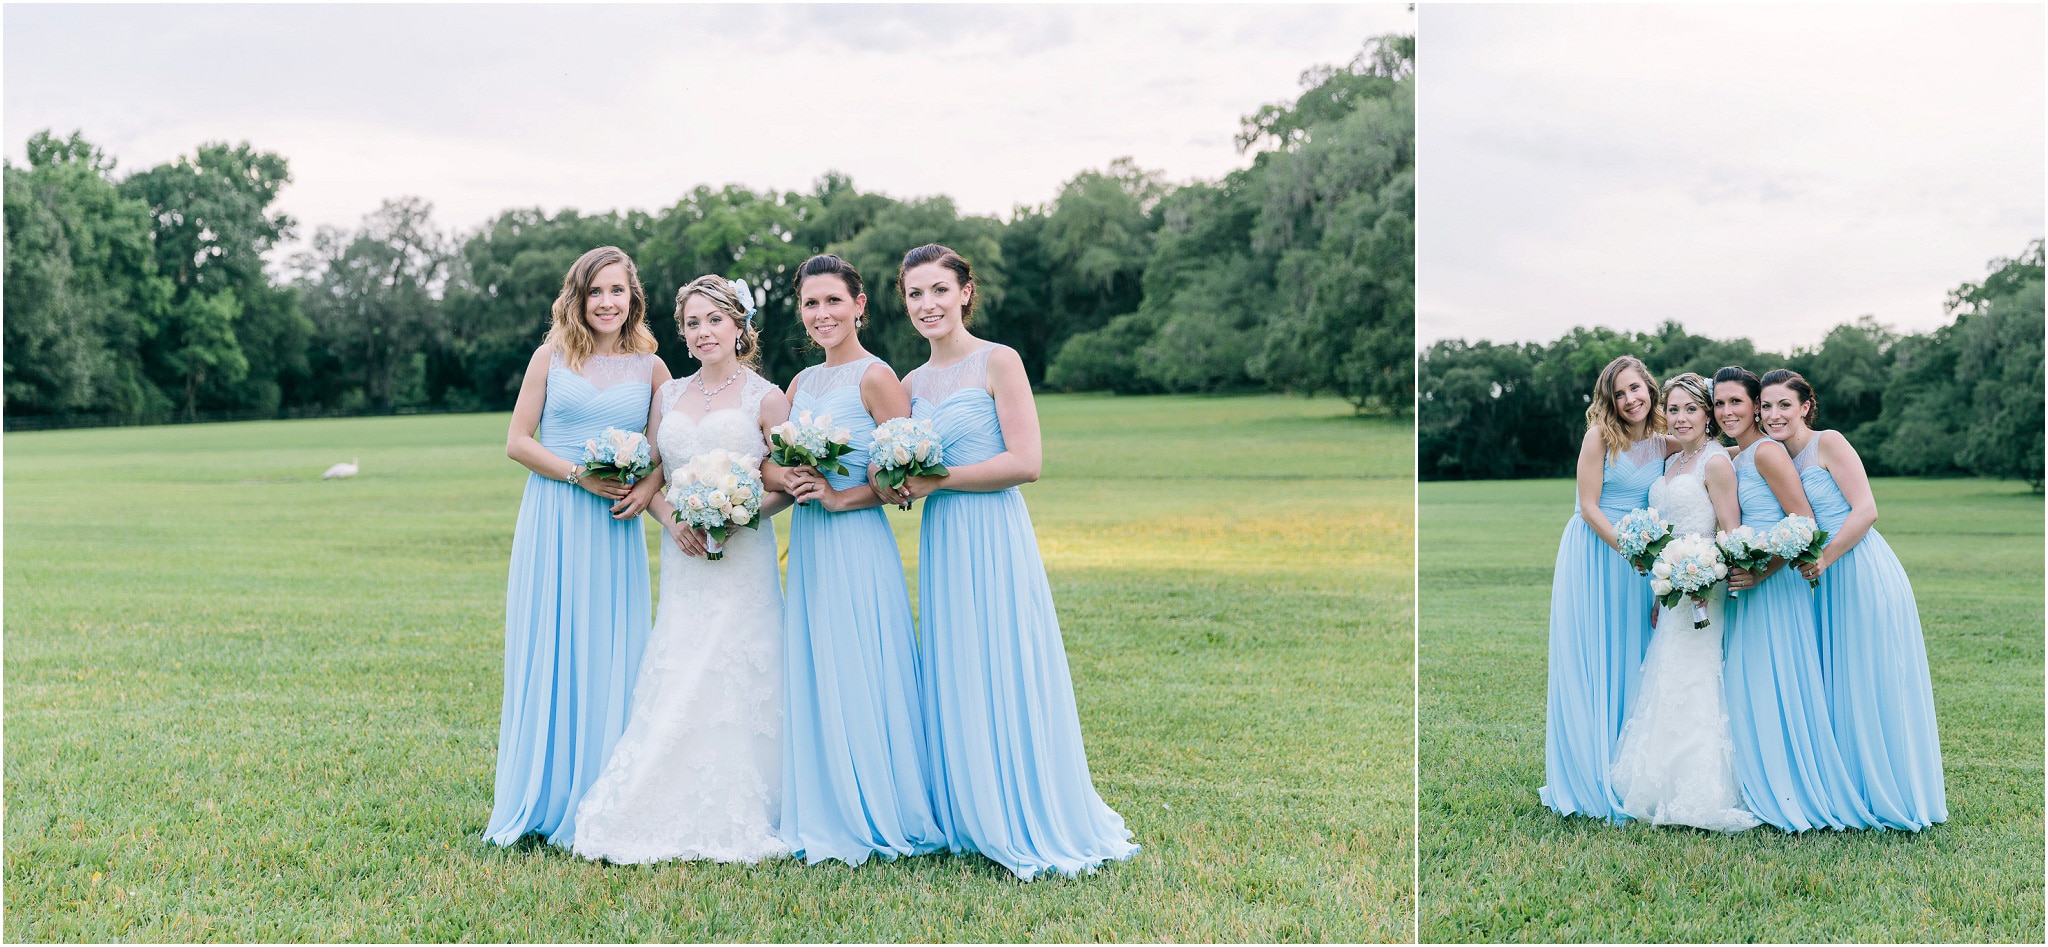 Bride with her bridesmaids on the lawn